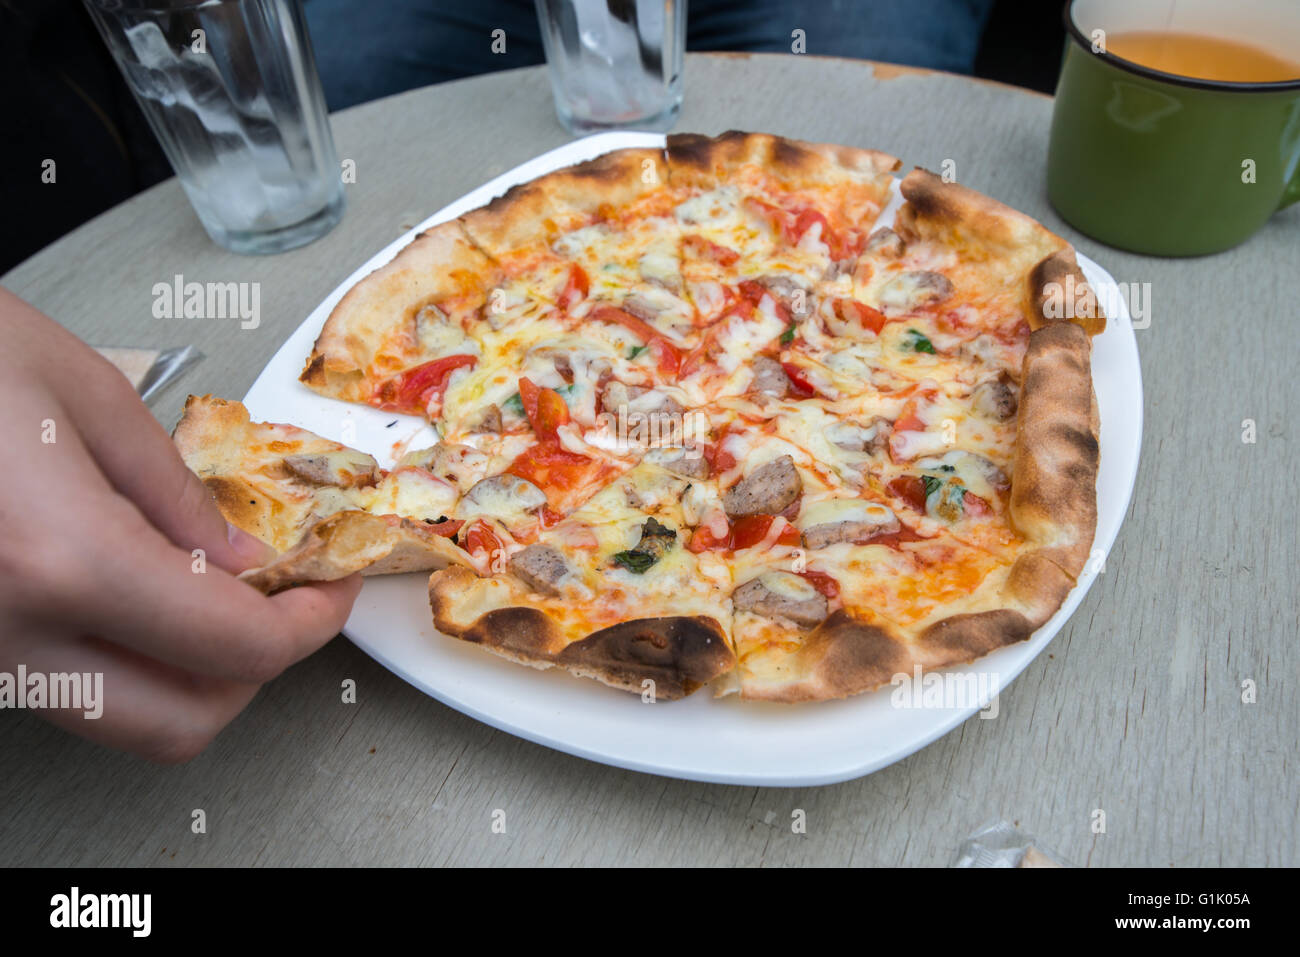 A small pizza on plate with piece being taken Stock Photo